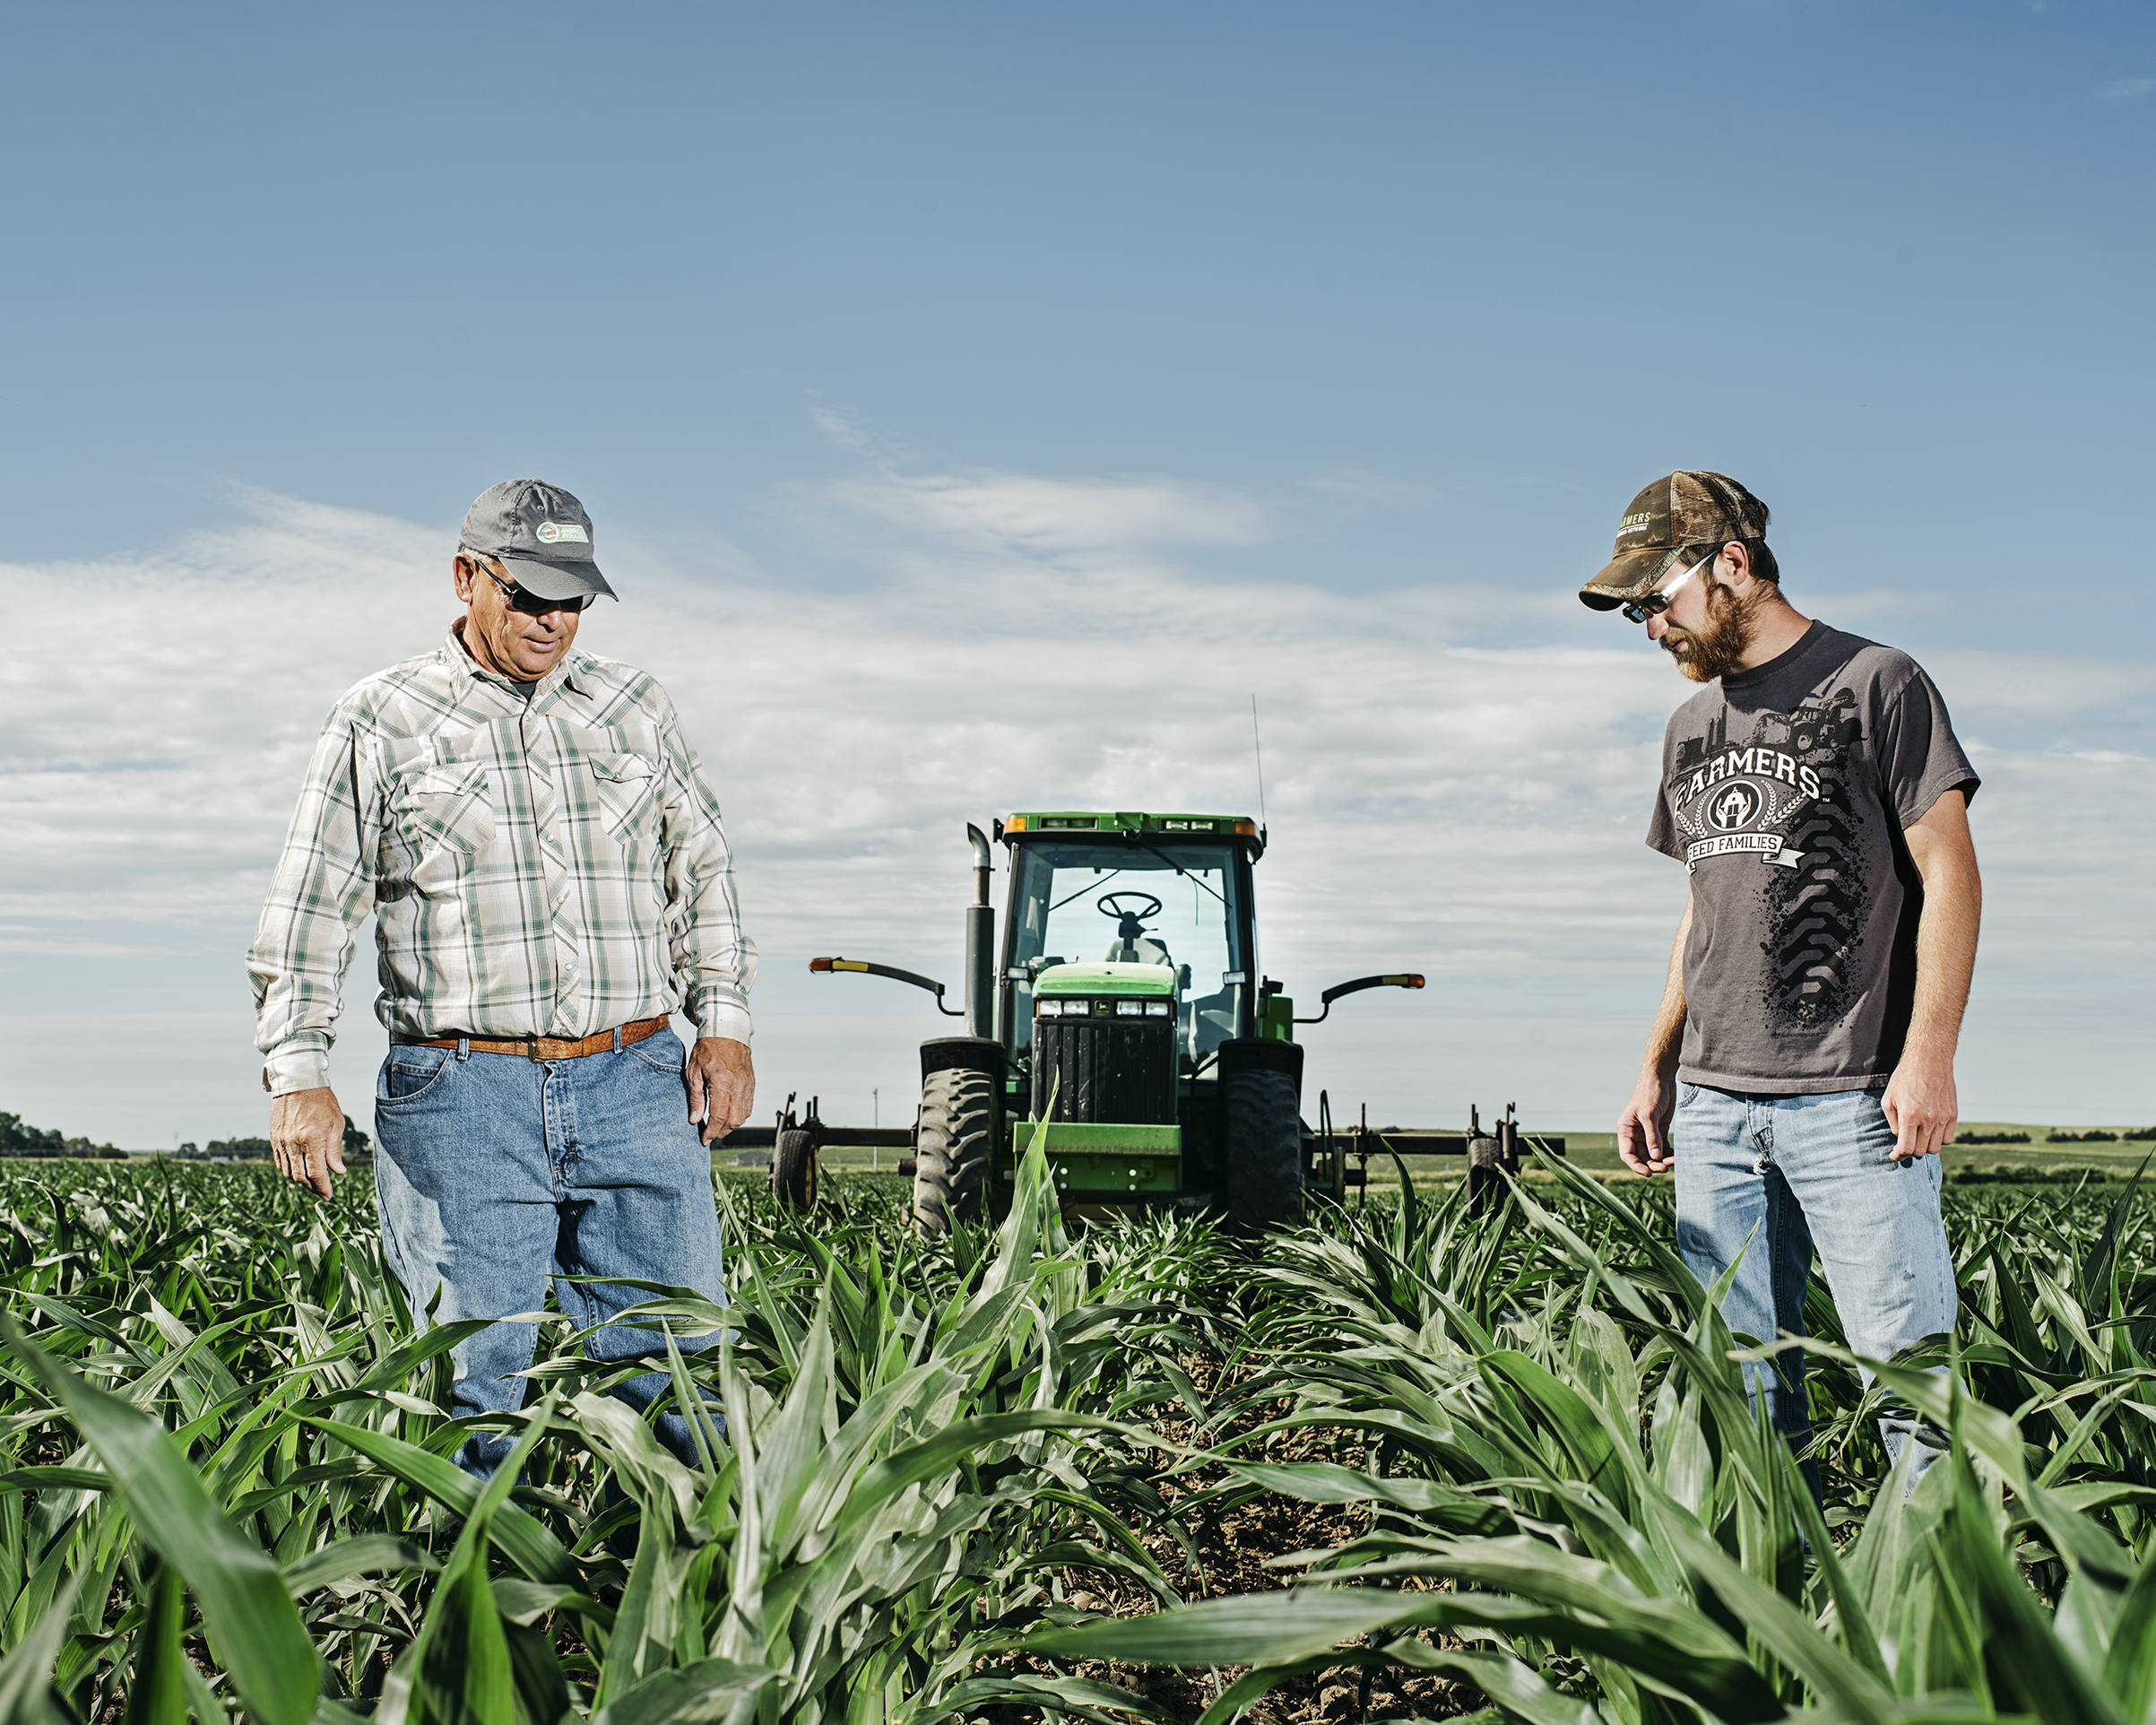 Guy Mills and his son James examine soil depth while hilling a cornfield with a John Deere tractor outside of Ansley, Neb., on June 19 (Photograph by Benjamin Rasmussen for TIME)